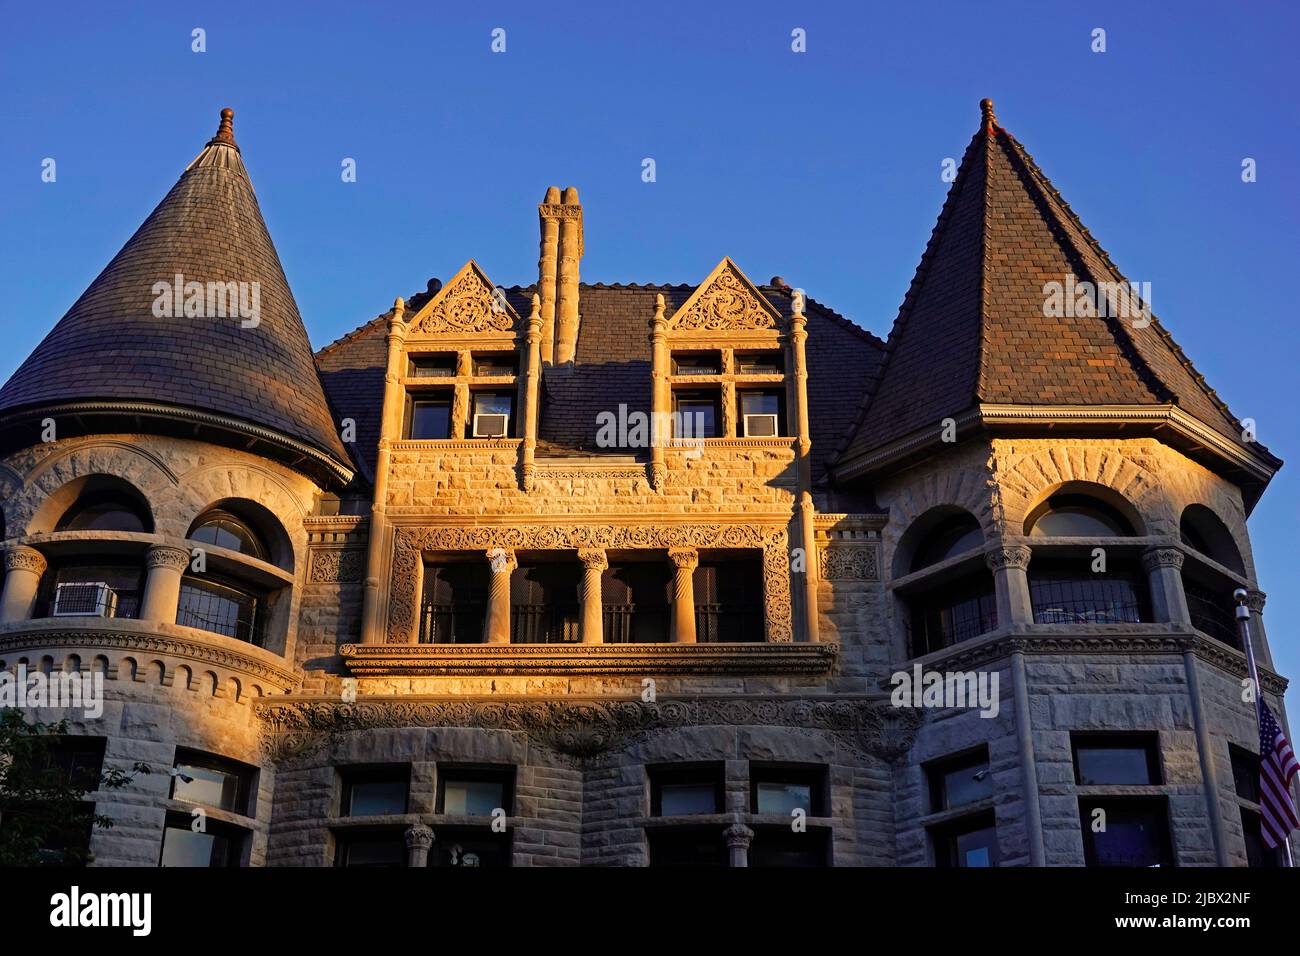 Poly Prep country day school on Prospect Park West Brooklyn NYC Stock Photo